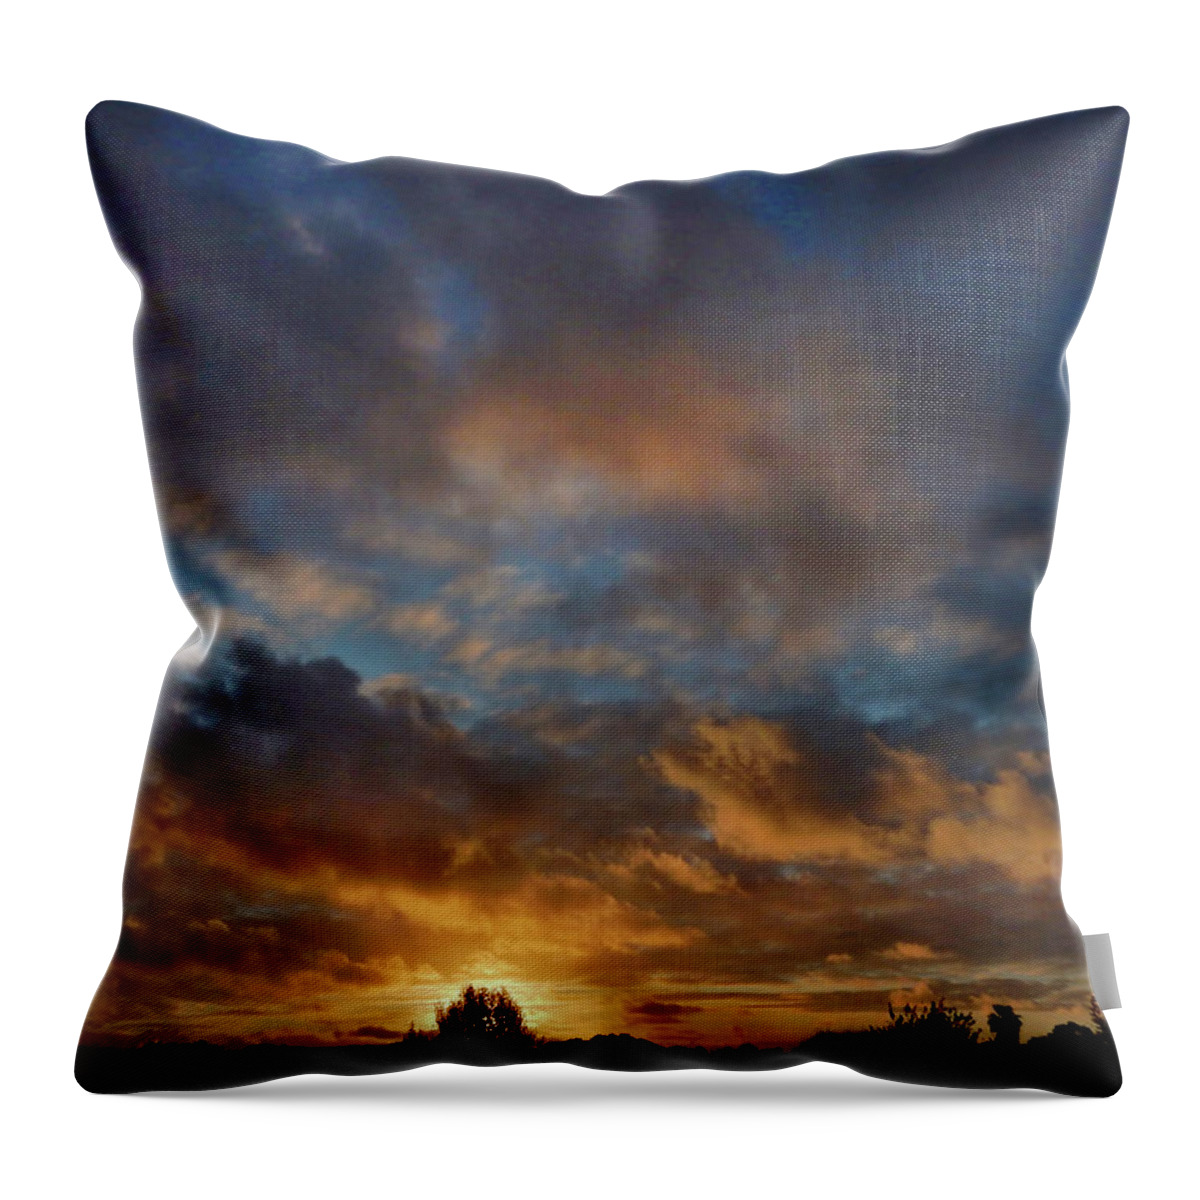 Sunset Throw Pillow featuring the photograph Whirly Sunset by Mark Blauhoefer